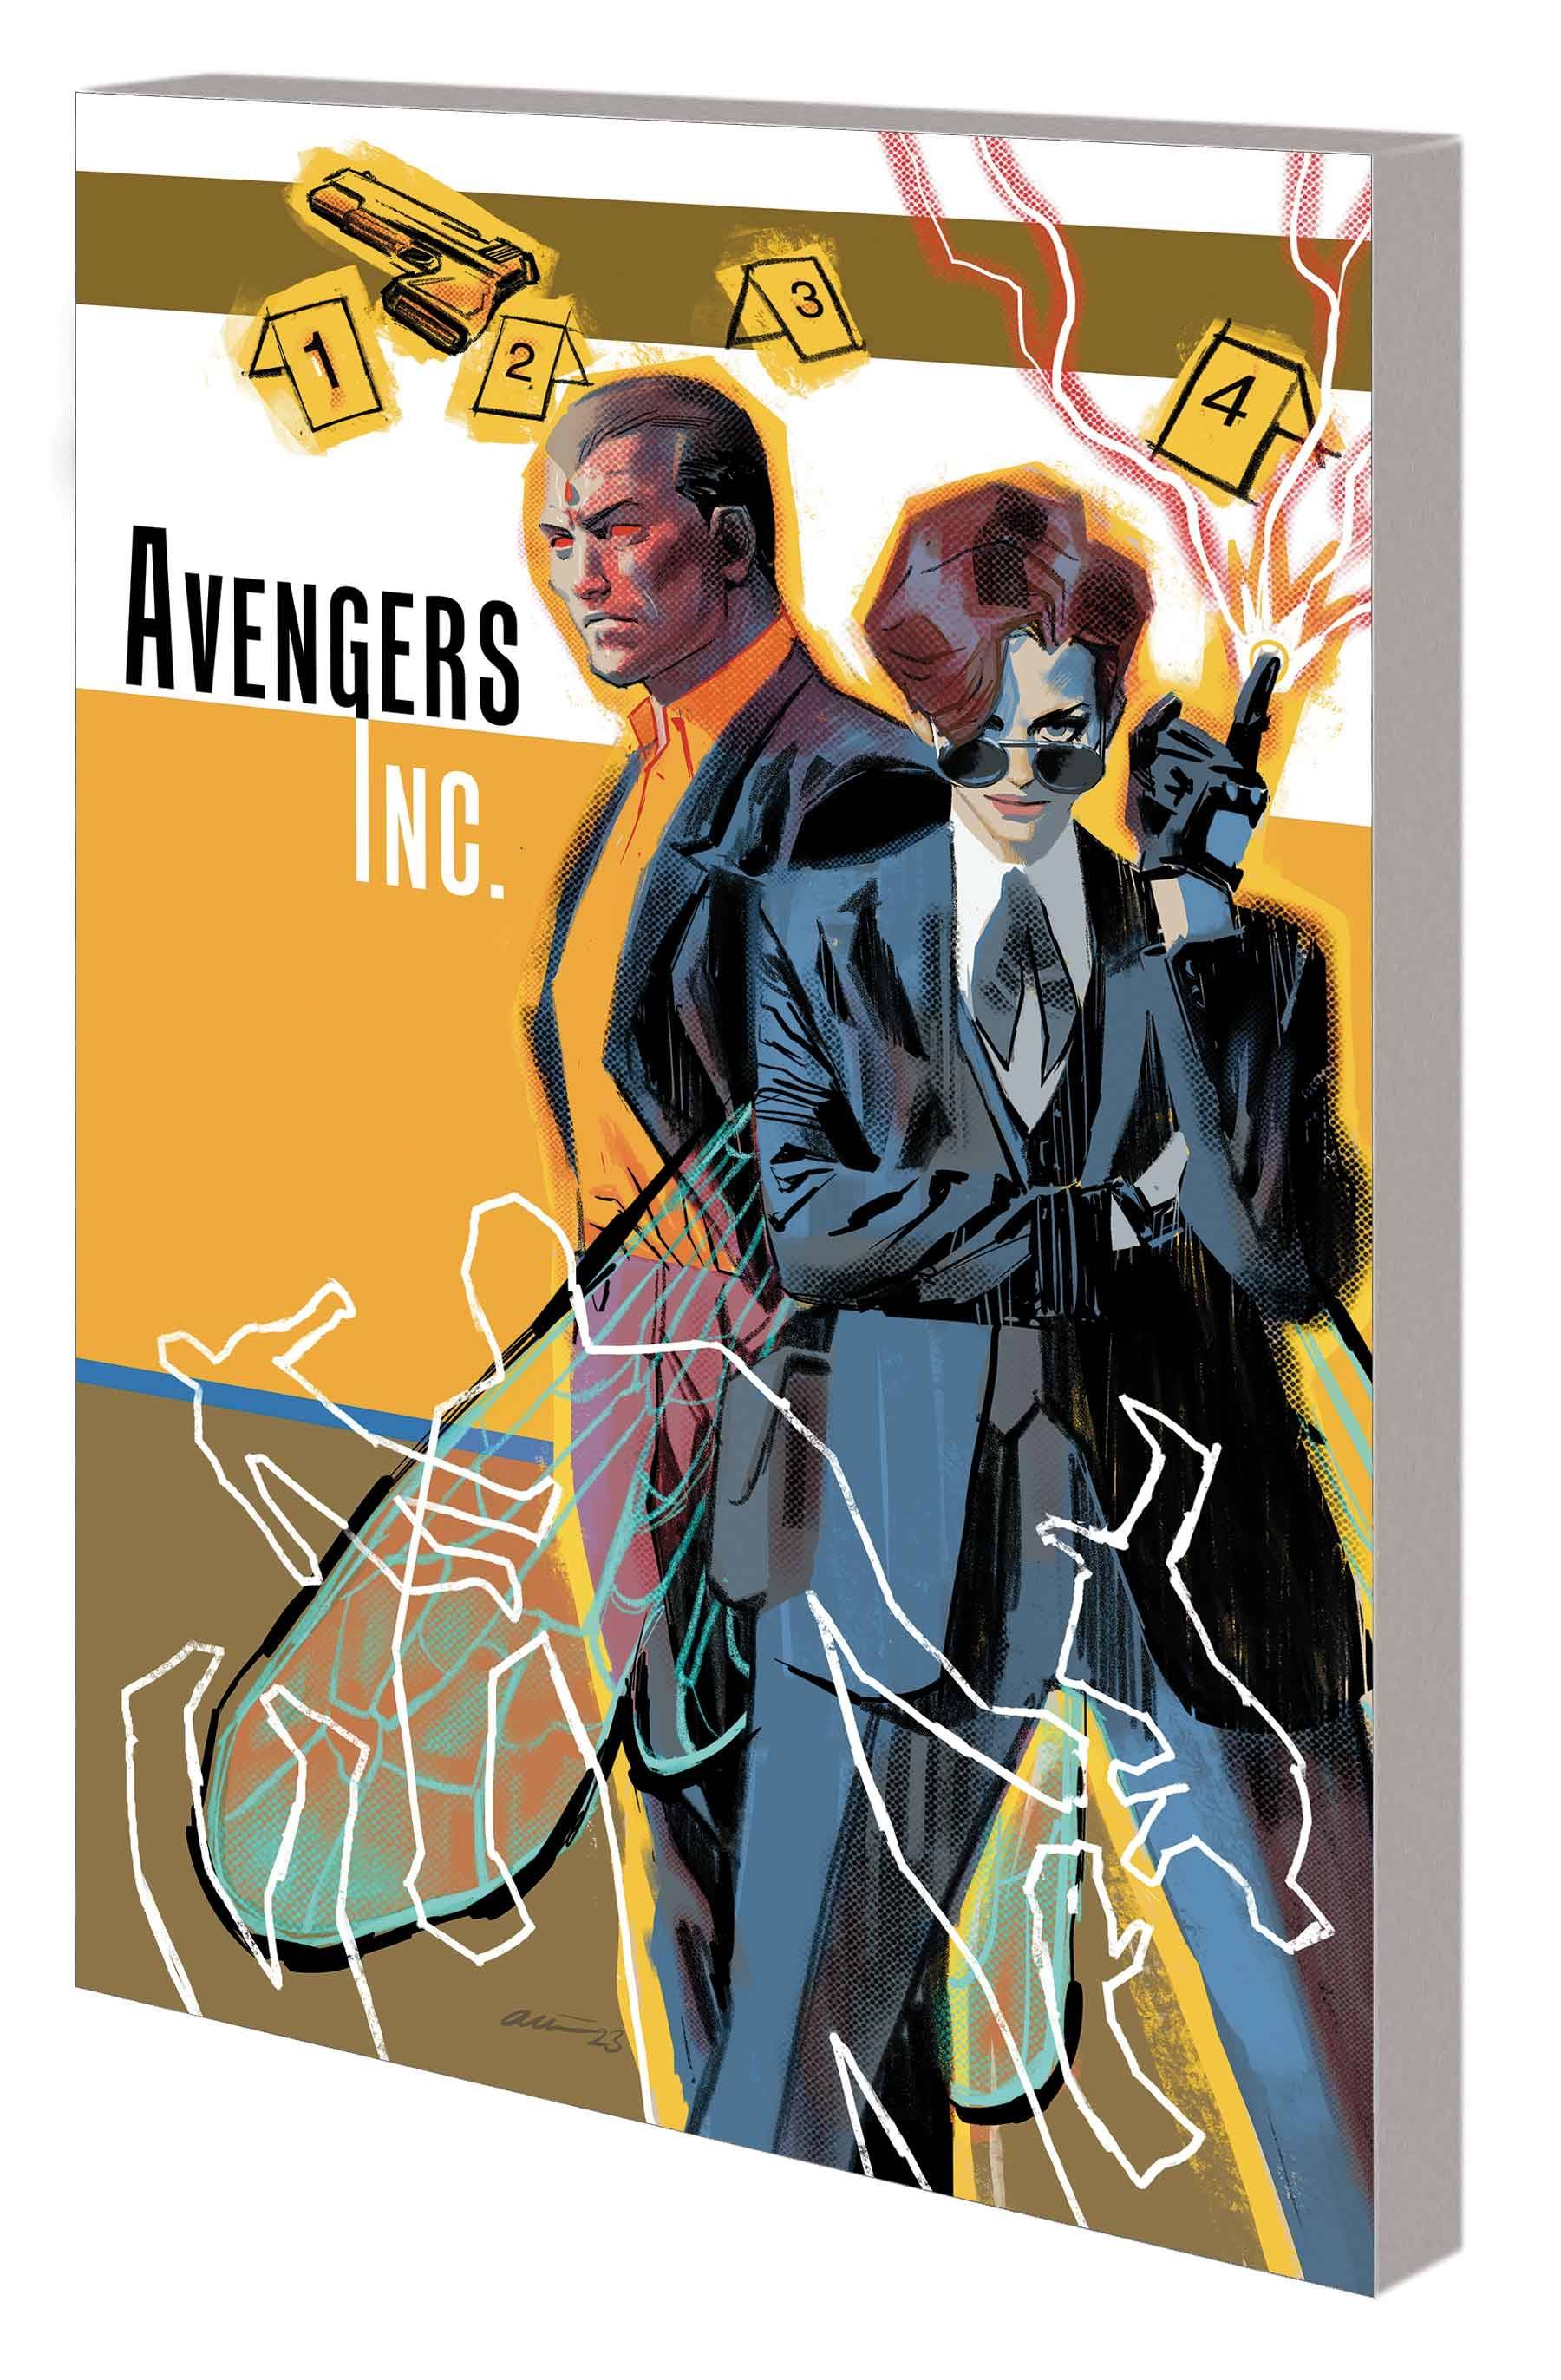 AVENGERS INC ACTION MYSTERY ADVENTURE TP